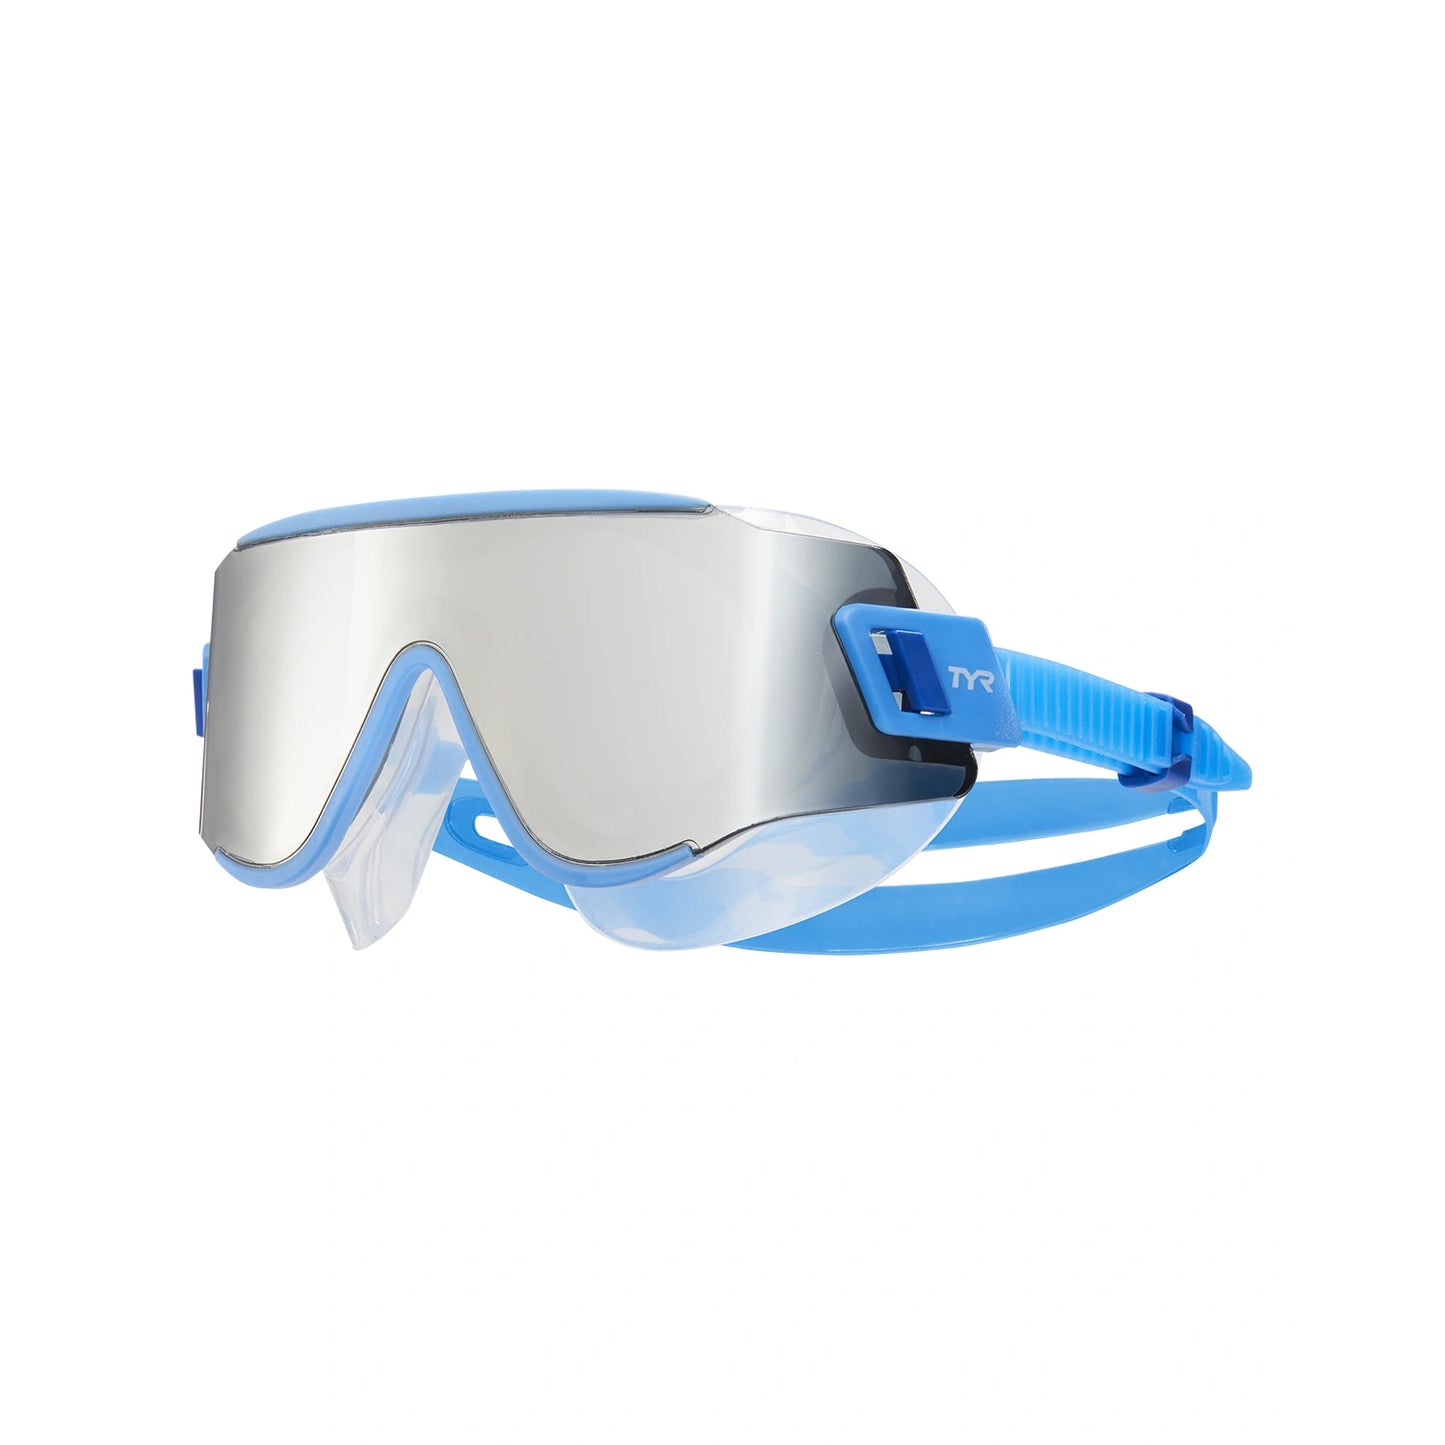 TYR Special Tidal Wave Mirrored Mask Swimming Goggles - Best Price online Prokicksports.com